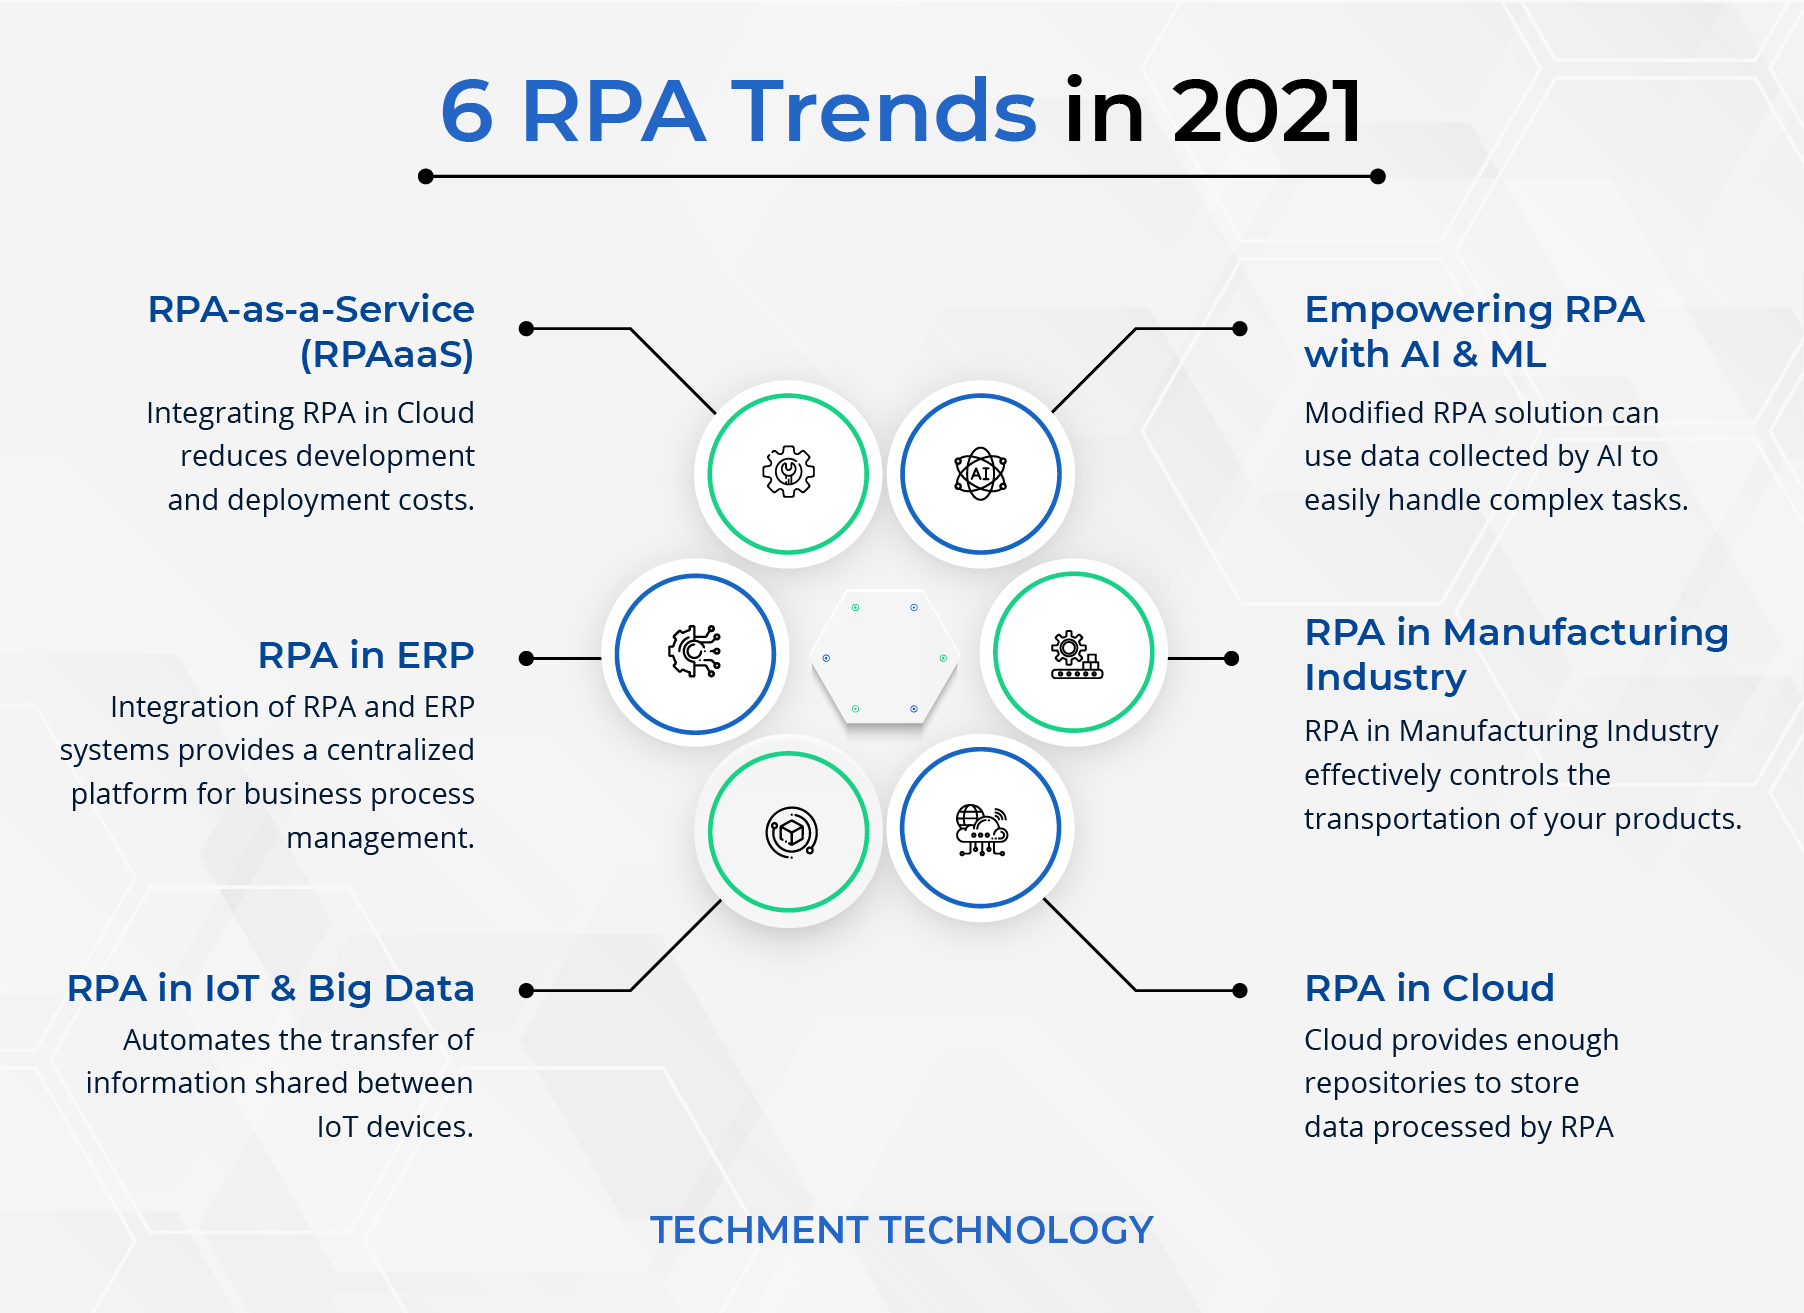 6 RPA Trends in 2021